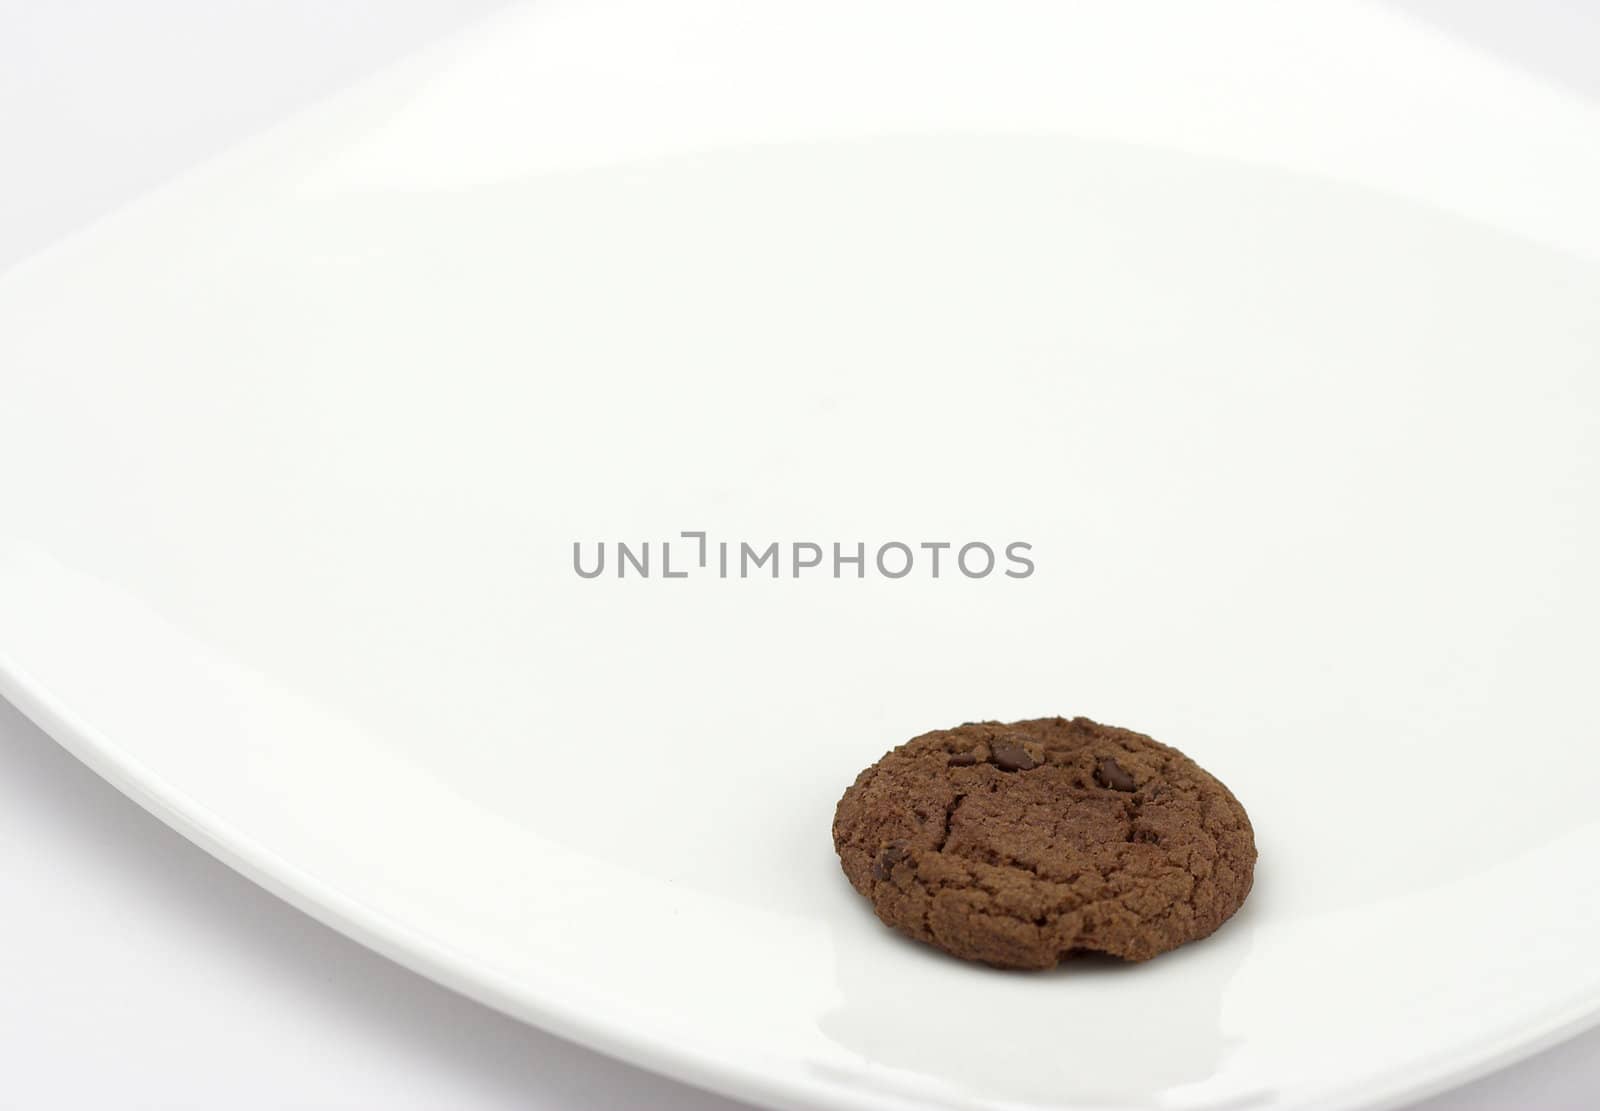  chocolate cookie by alexkosev